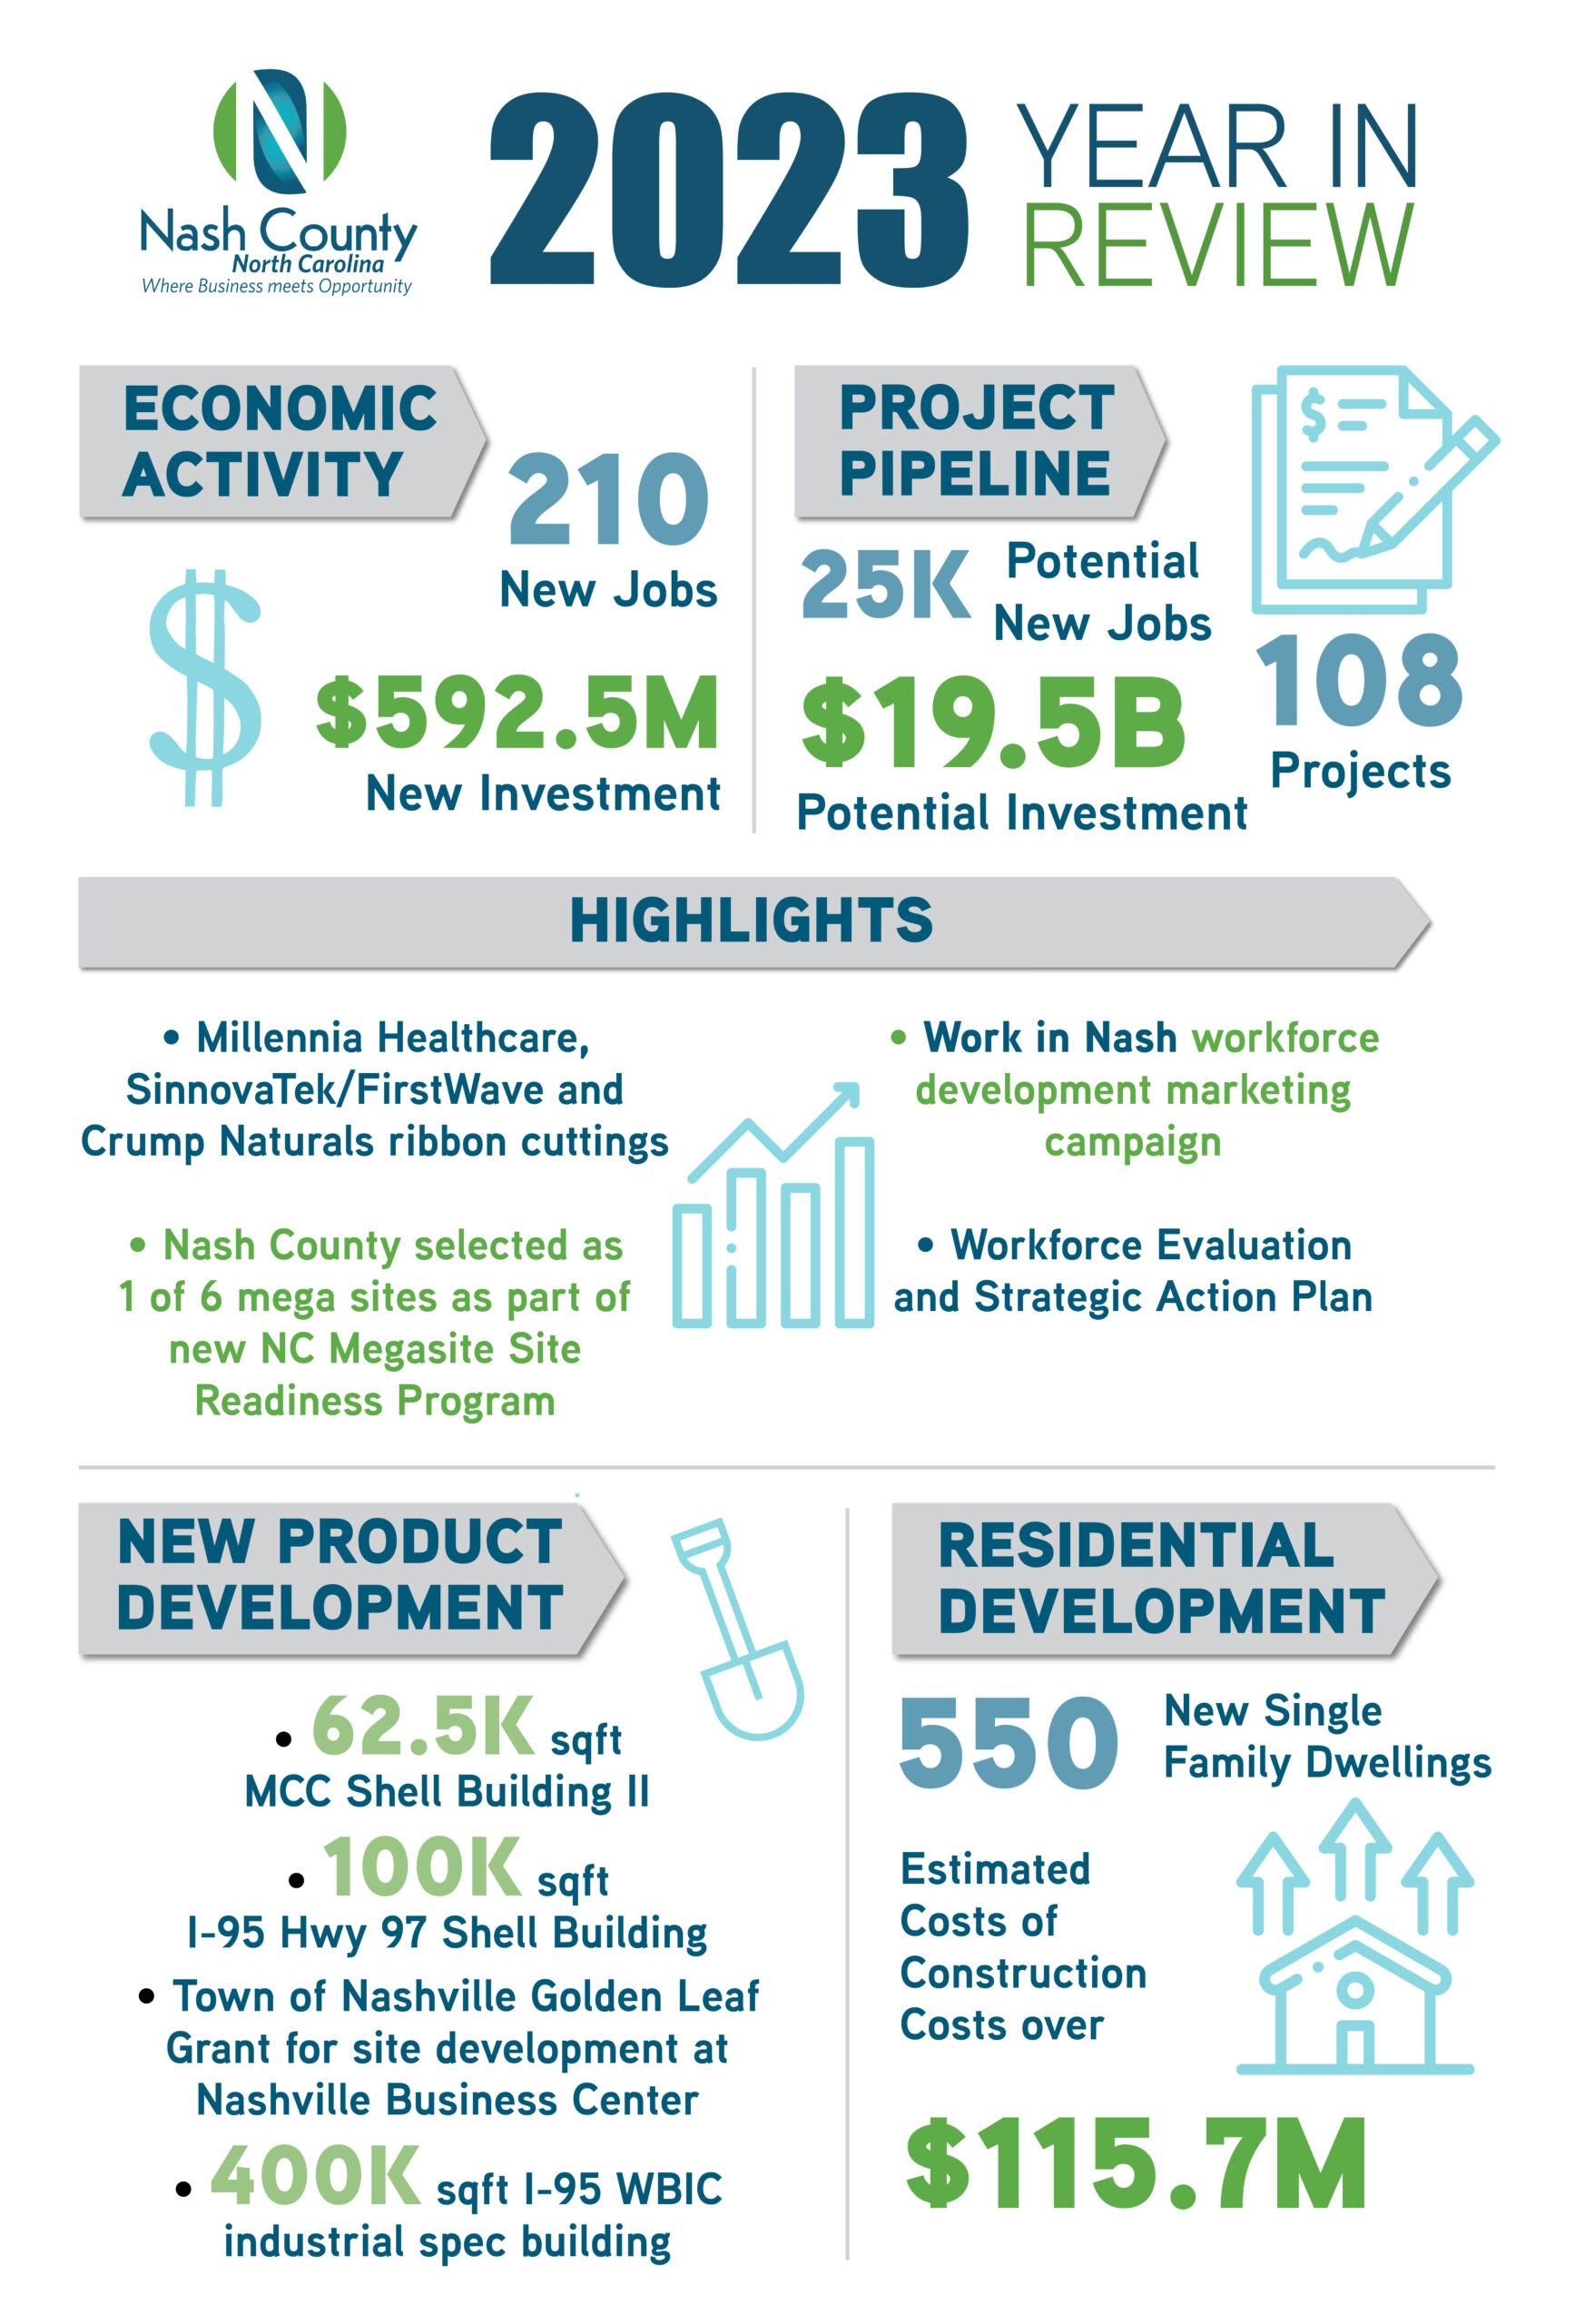 Nash County Economic Development 2023 Year in Review